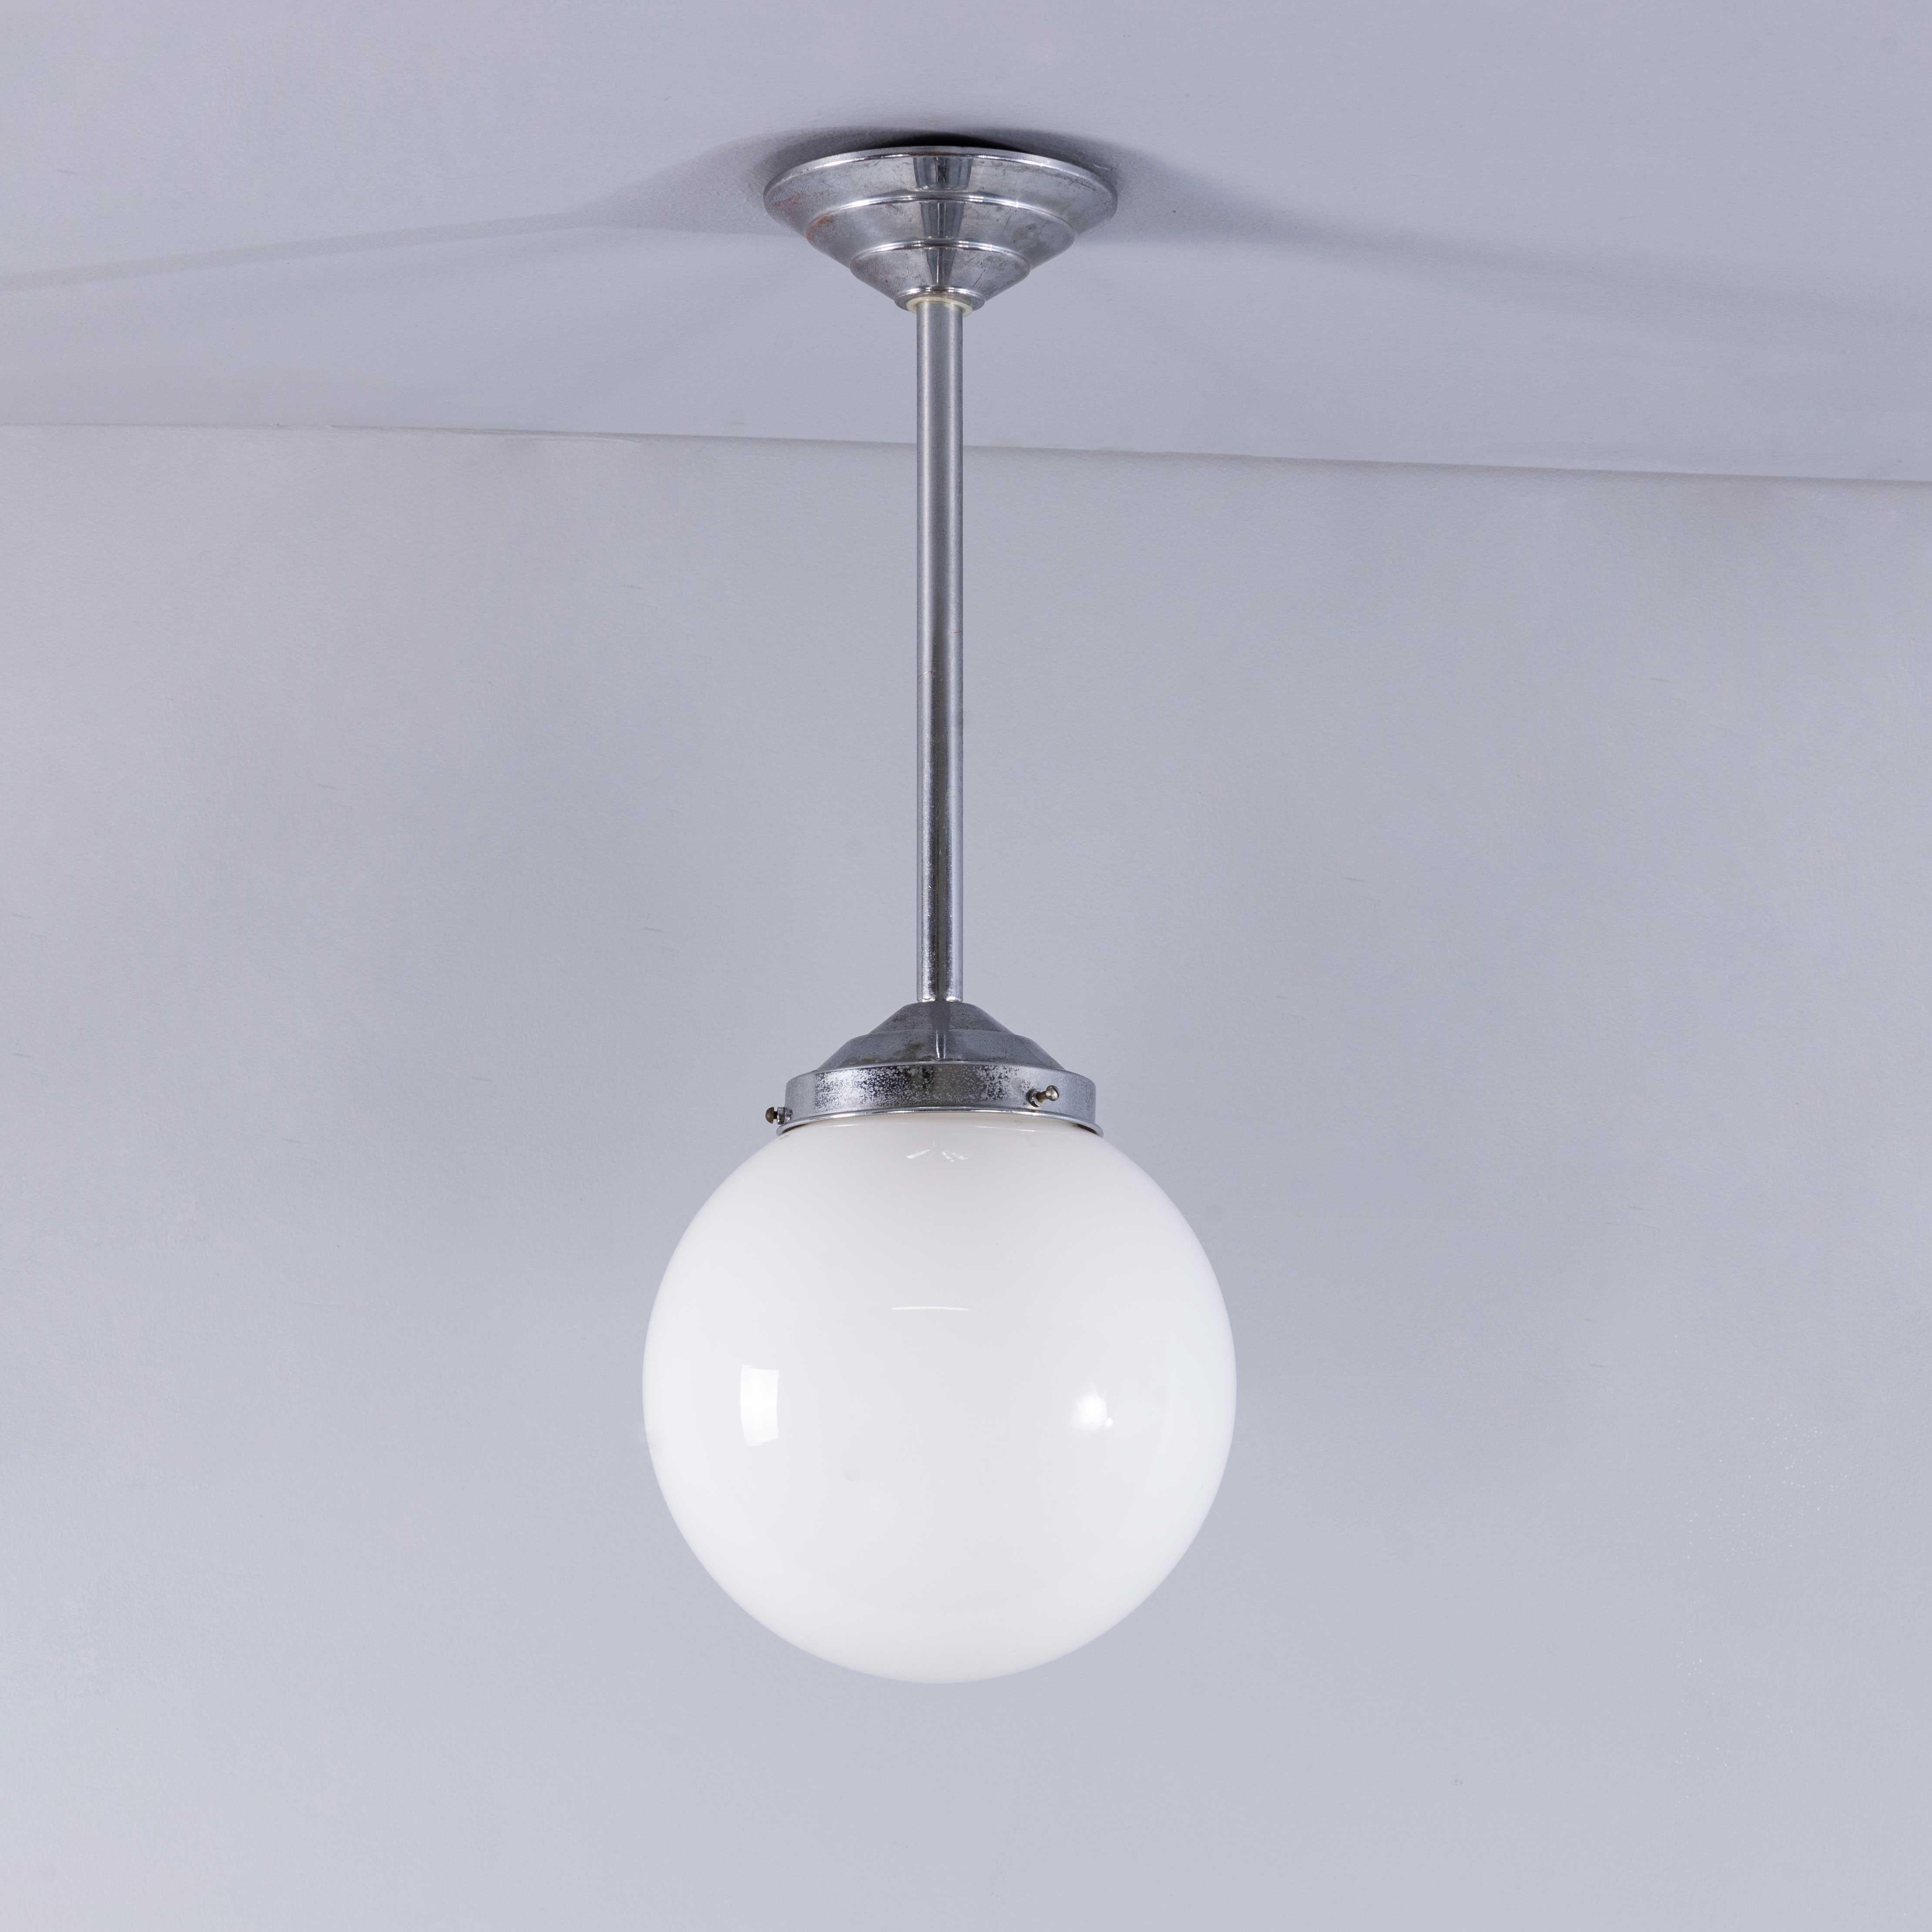 Mid-20th Century 1950's Original French Tabac Opal Glass Pendant Lamp - Single (958.4) For Sale